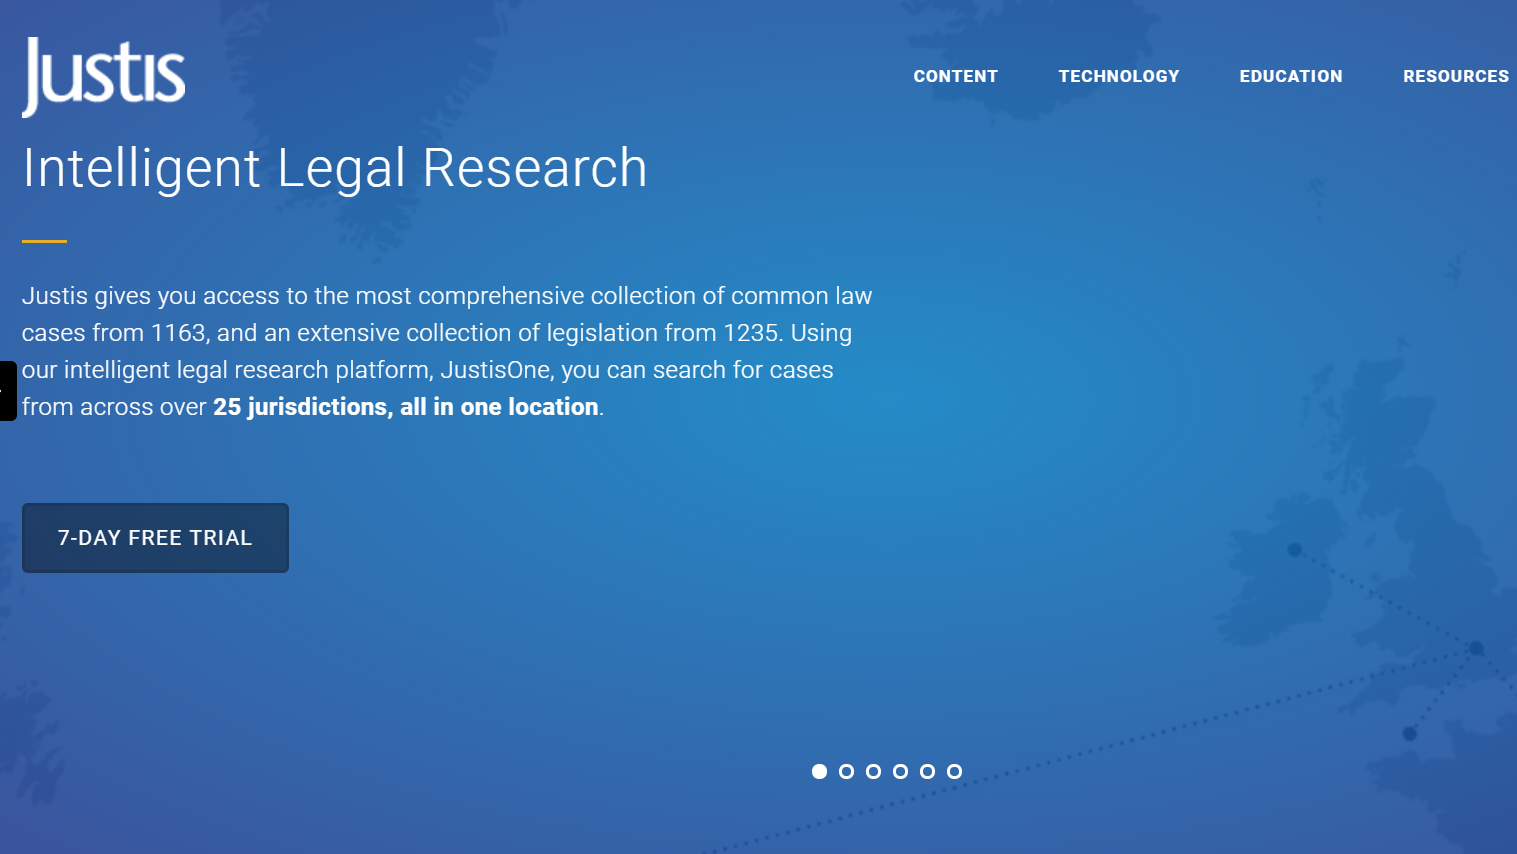 Global Legal Research Company vLex Acquires UK Service Justis Publishing